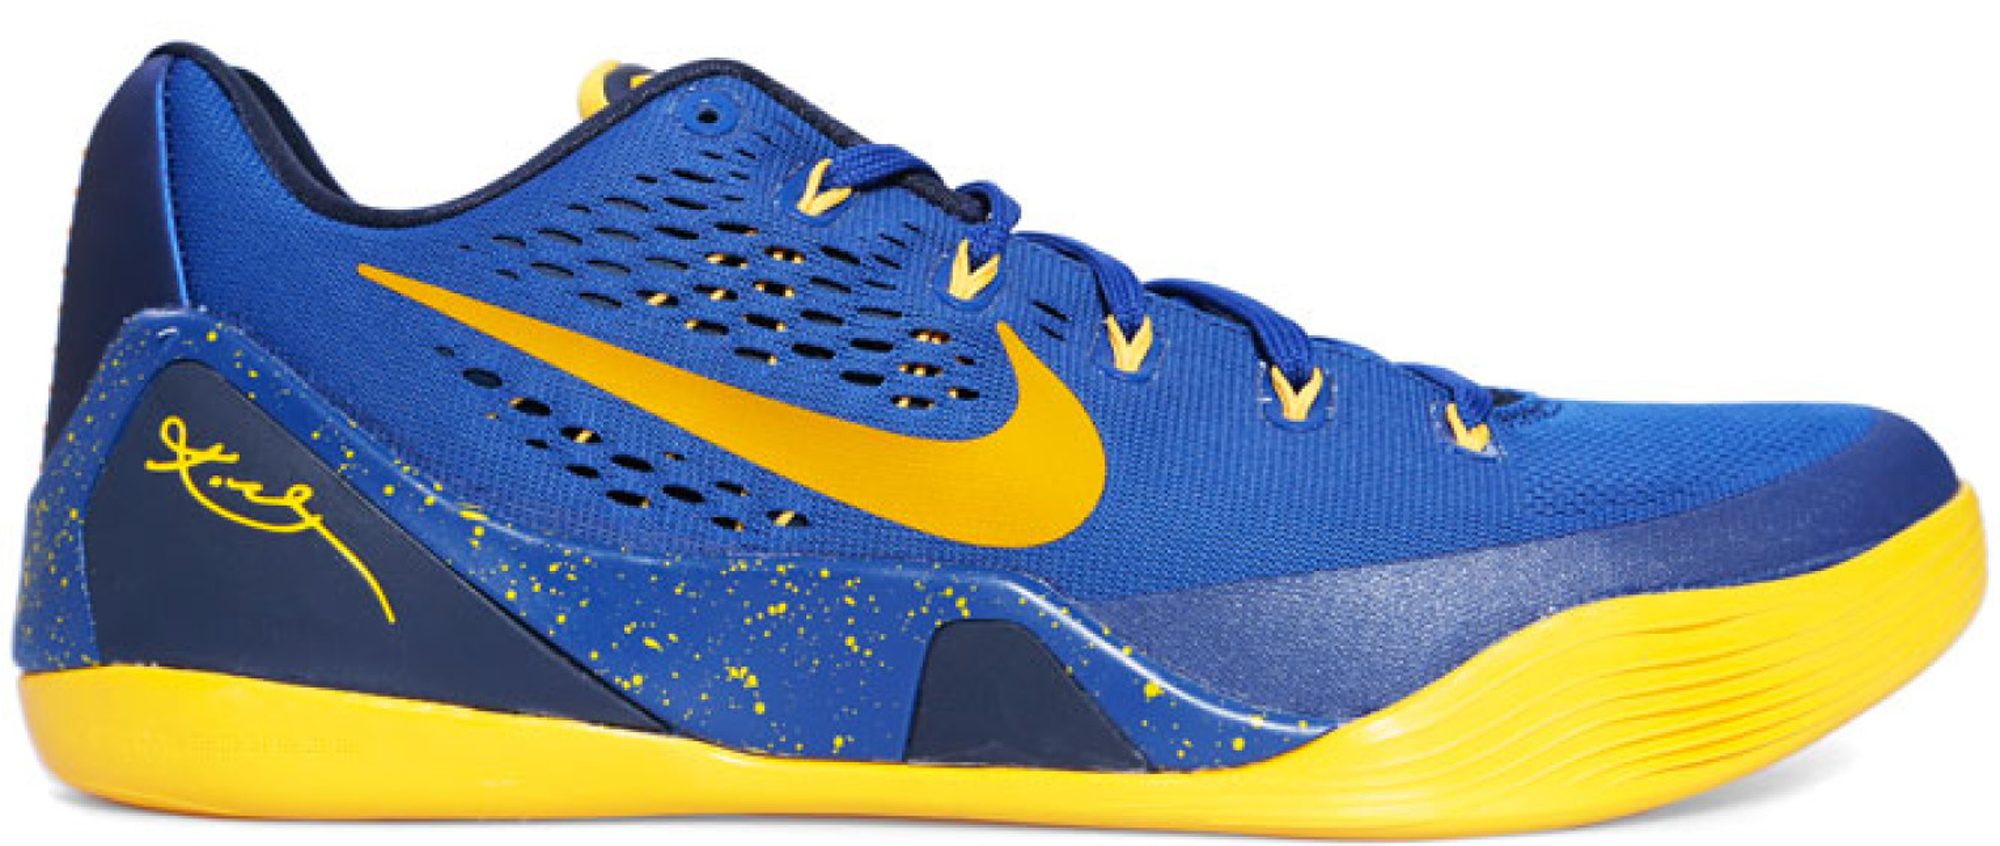 kobe 9 low blue and yellow